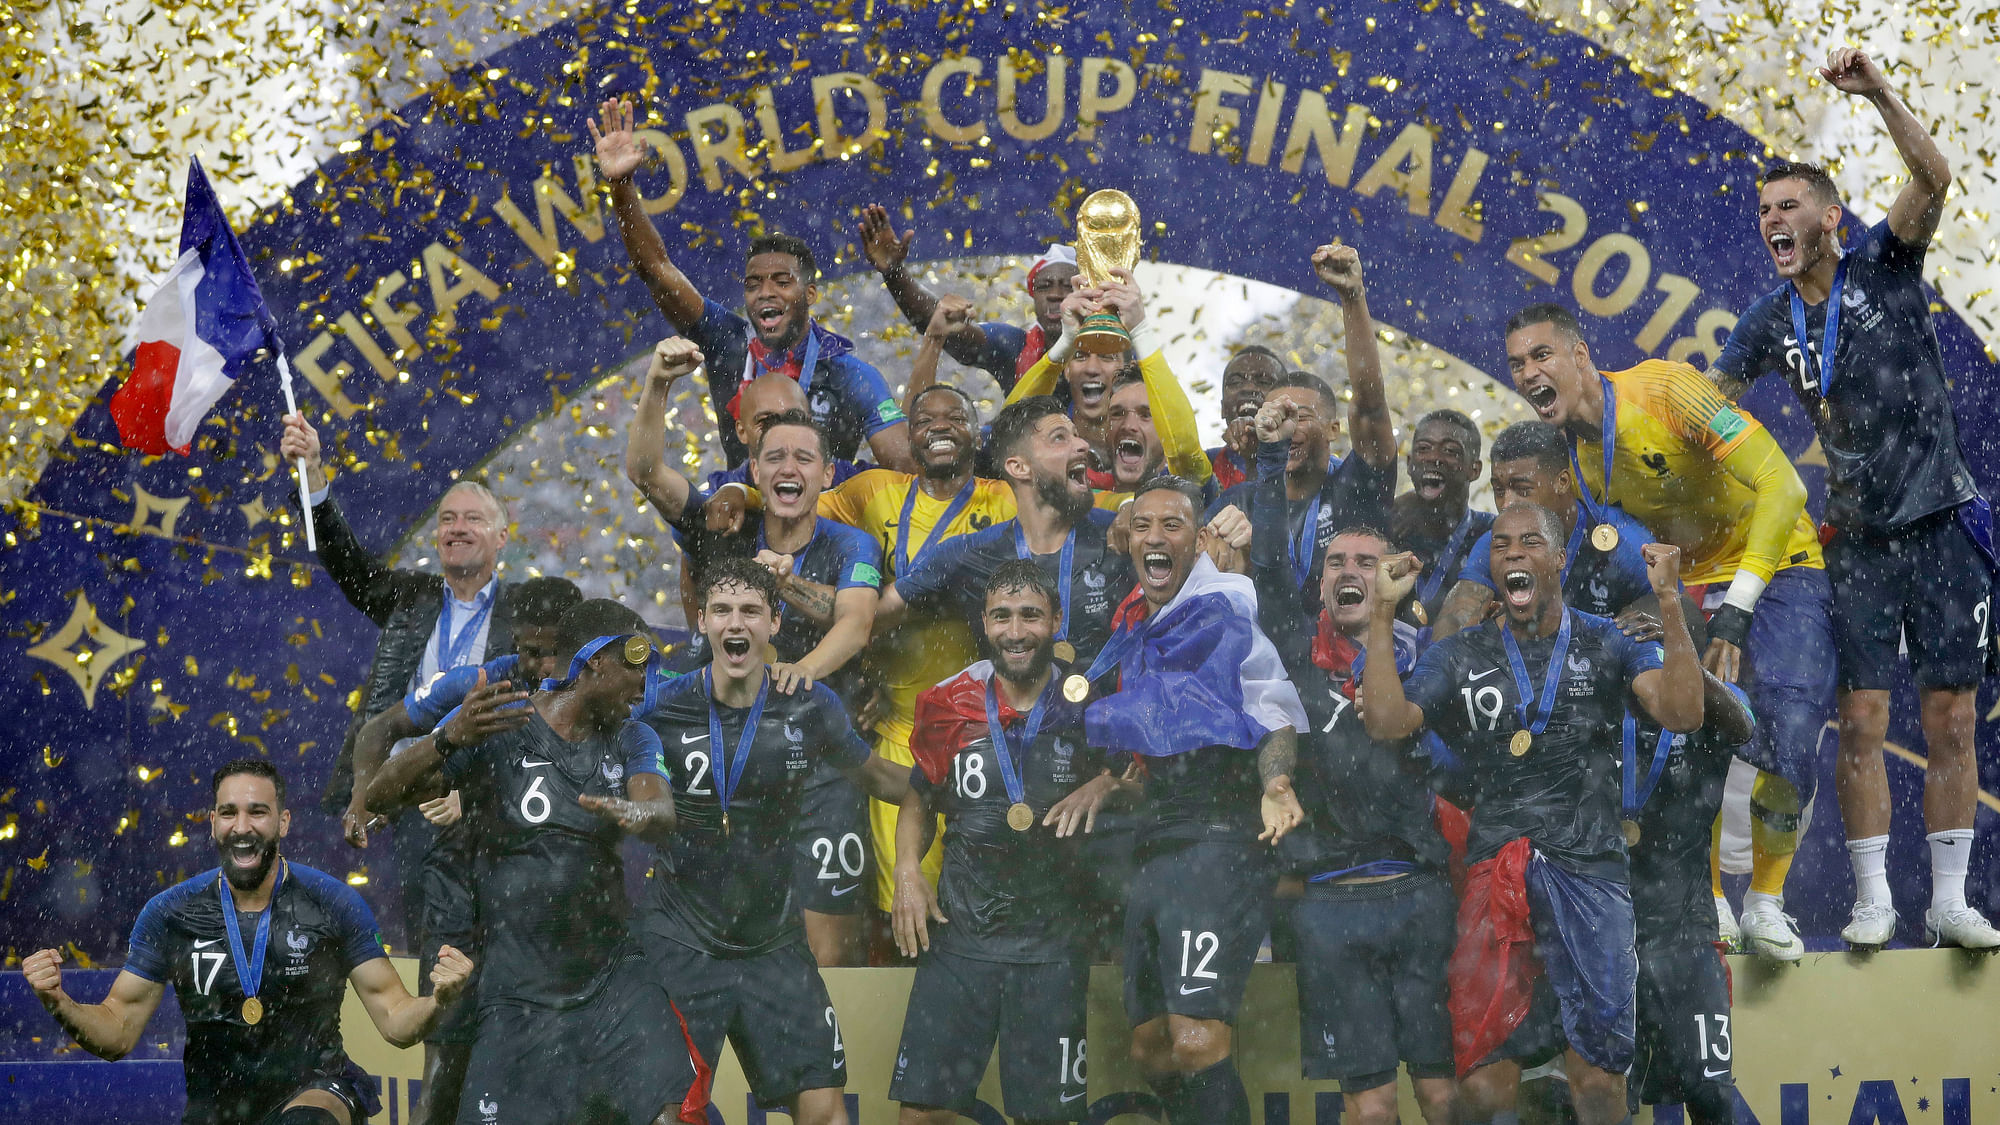 France goalkeeper Hugo Lloris holds the trophy aloft after the final match between France and Croatia at the 2018 soccer World Cup in the Luzhniki Stadium in Moscow, Russia, Sunday, July 15, 2018. France won the final 4-2.&nbsp;